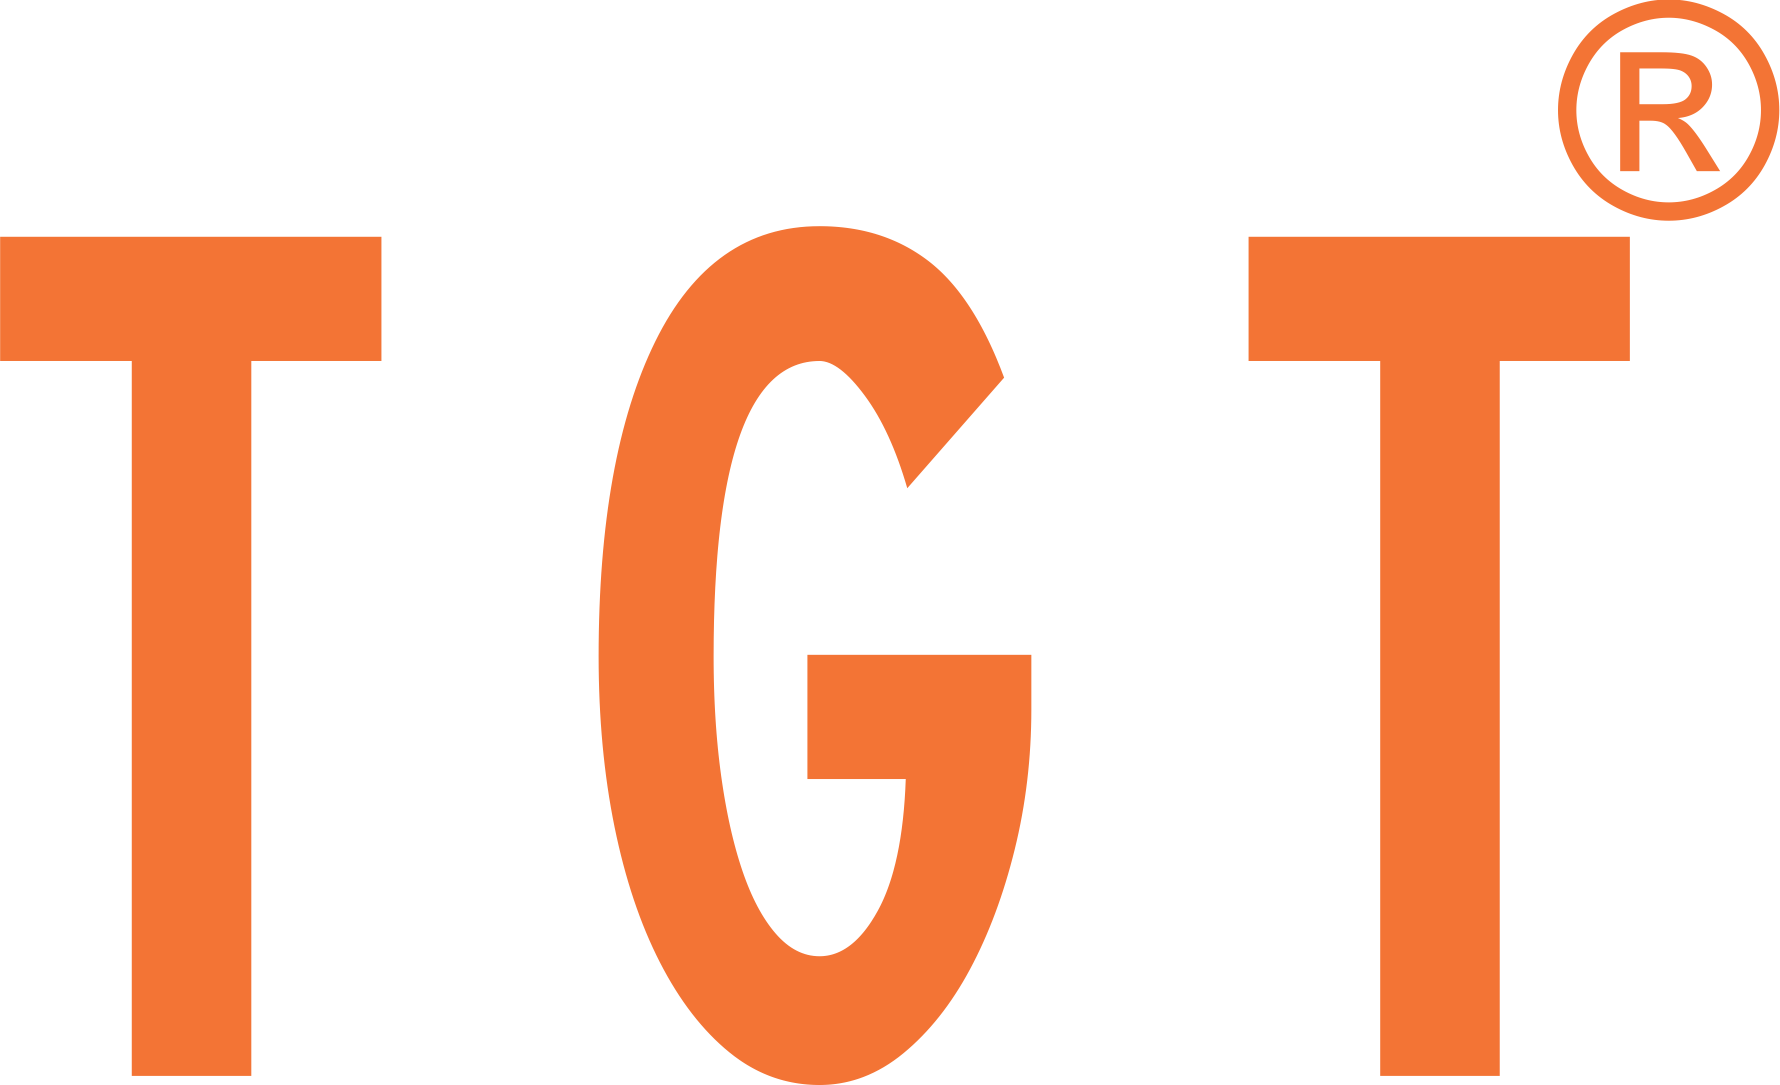 tgtwatches